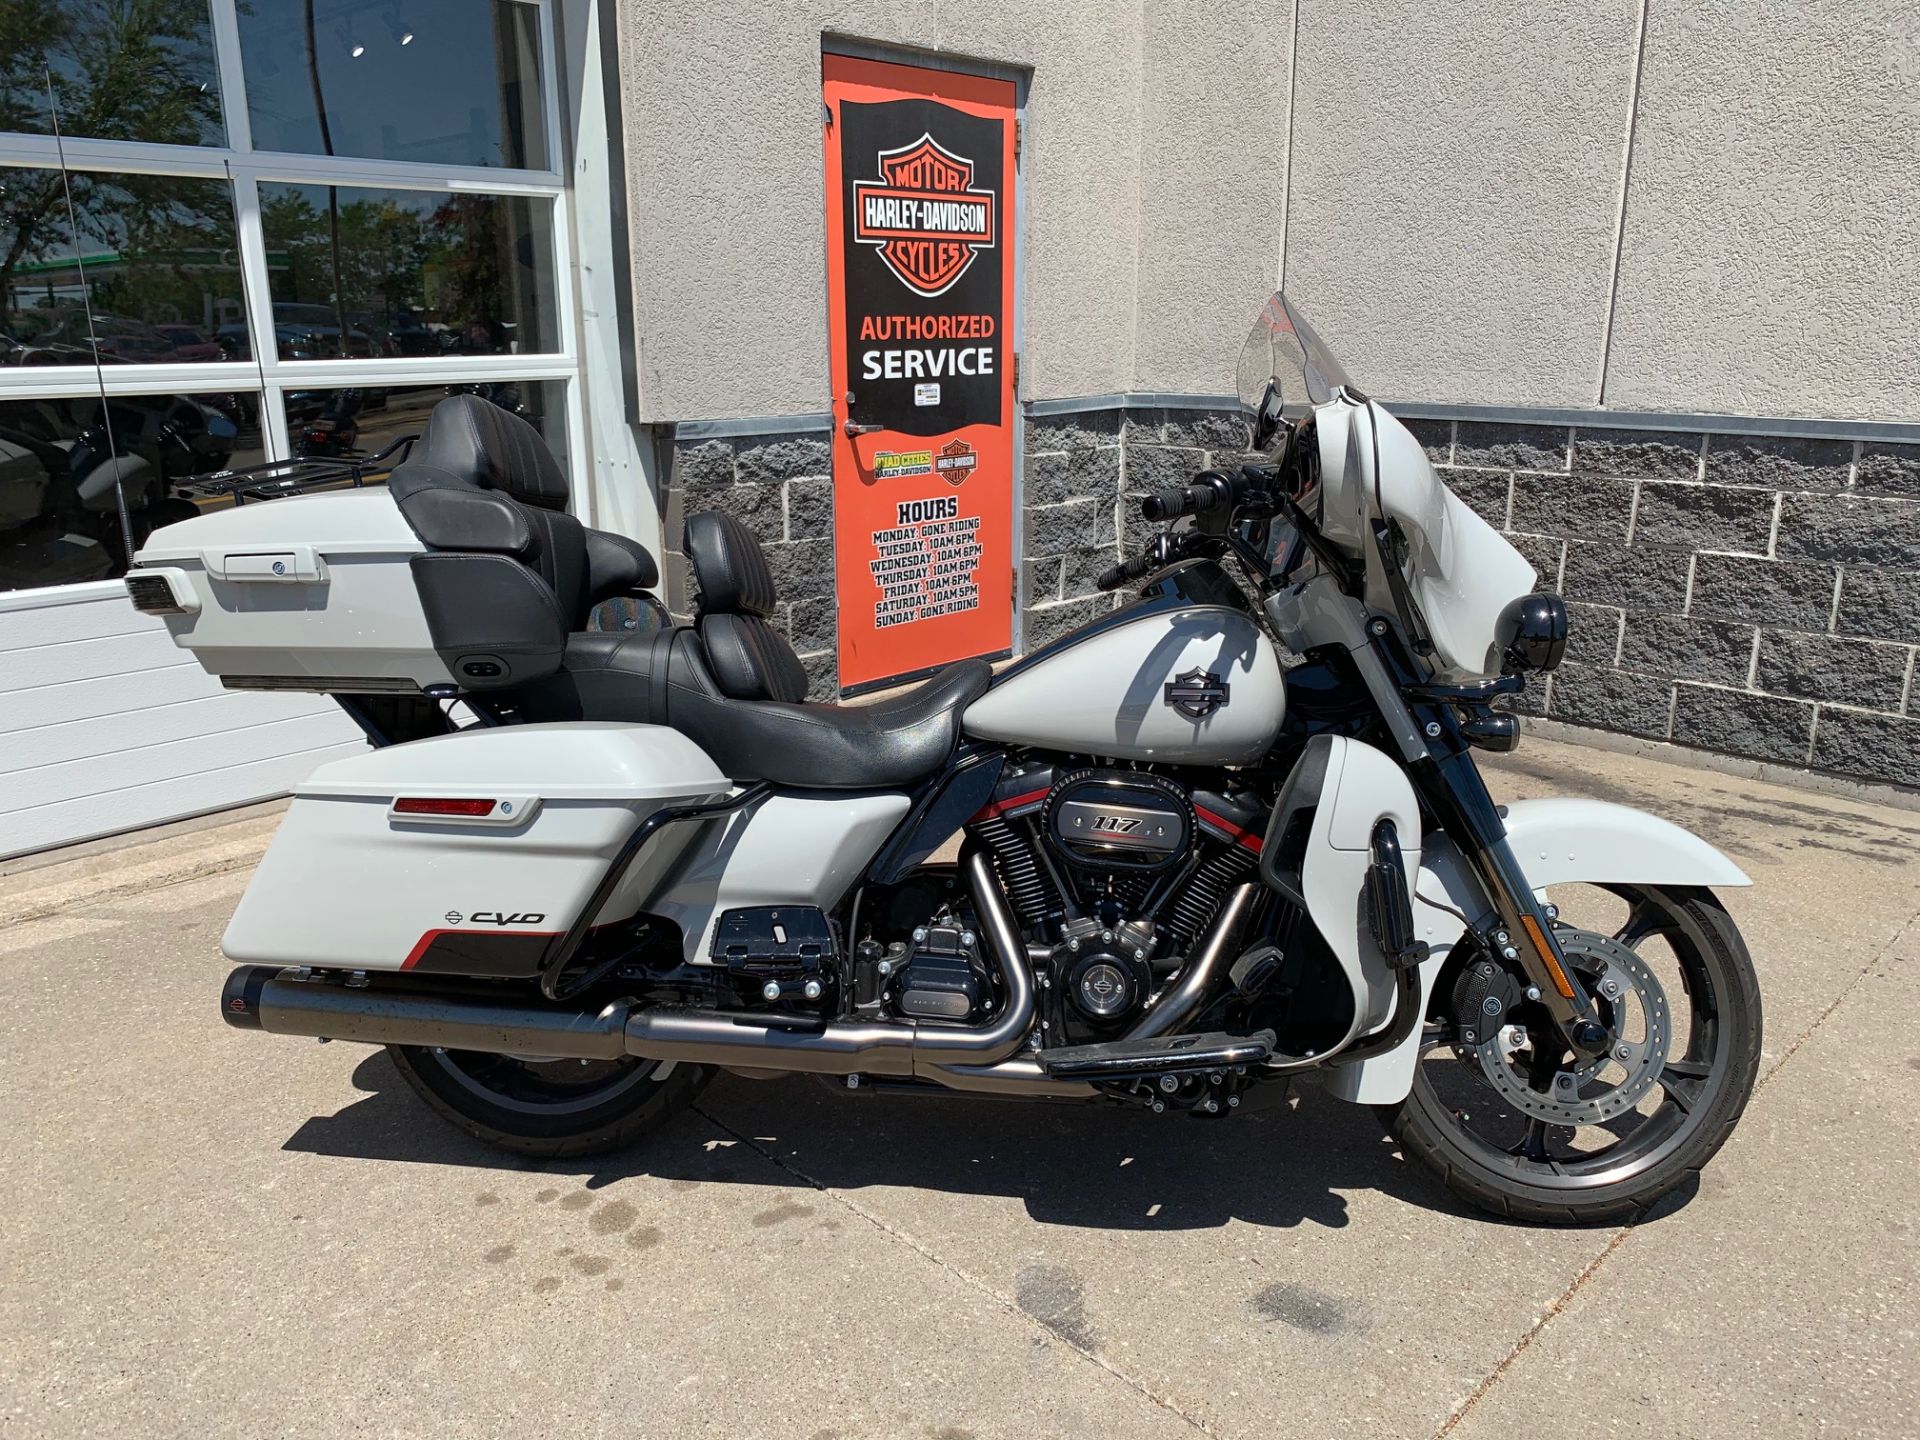 Used 2020 Harley Davidson Cvo Limited Sand Dune Motorcycles In Coralville Ia M954378